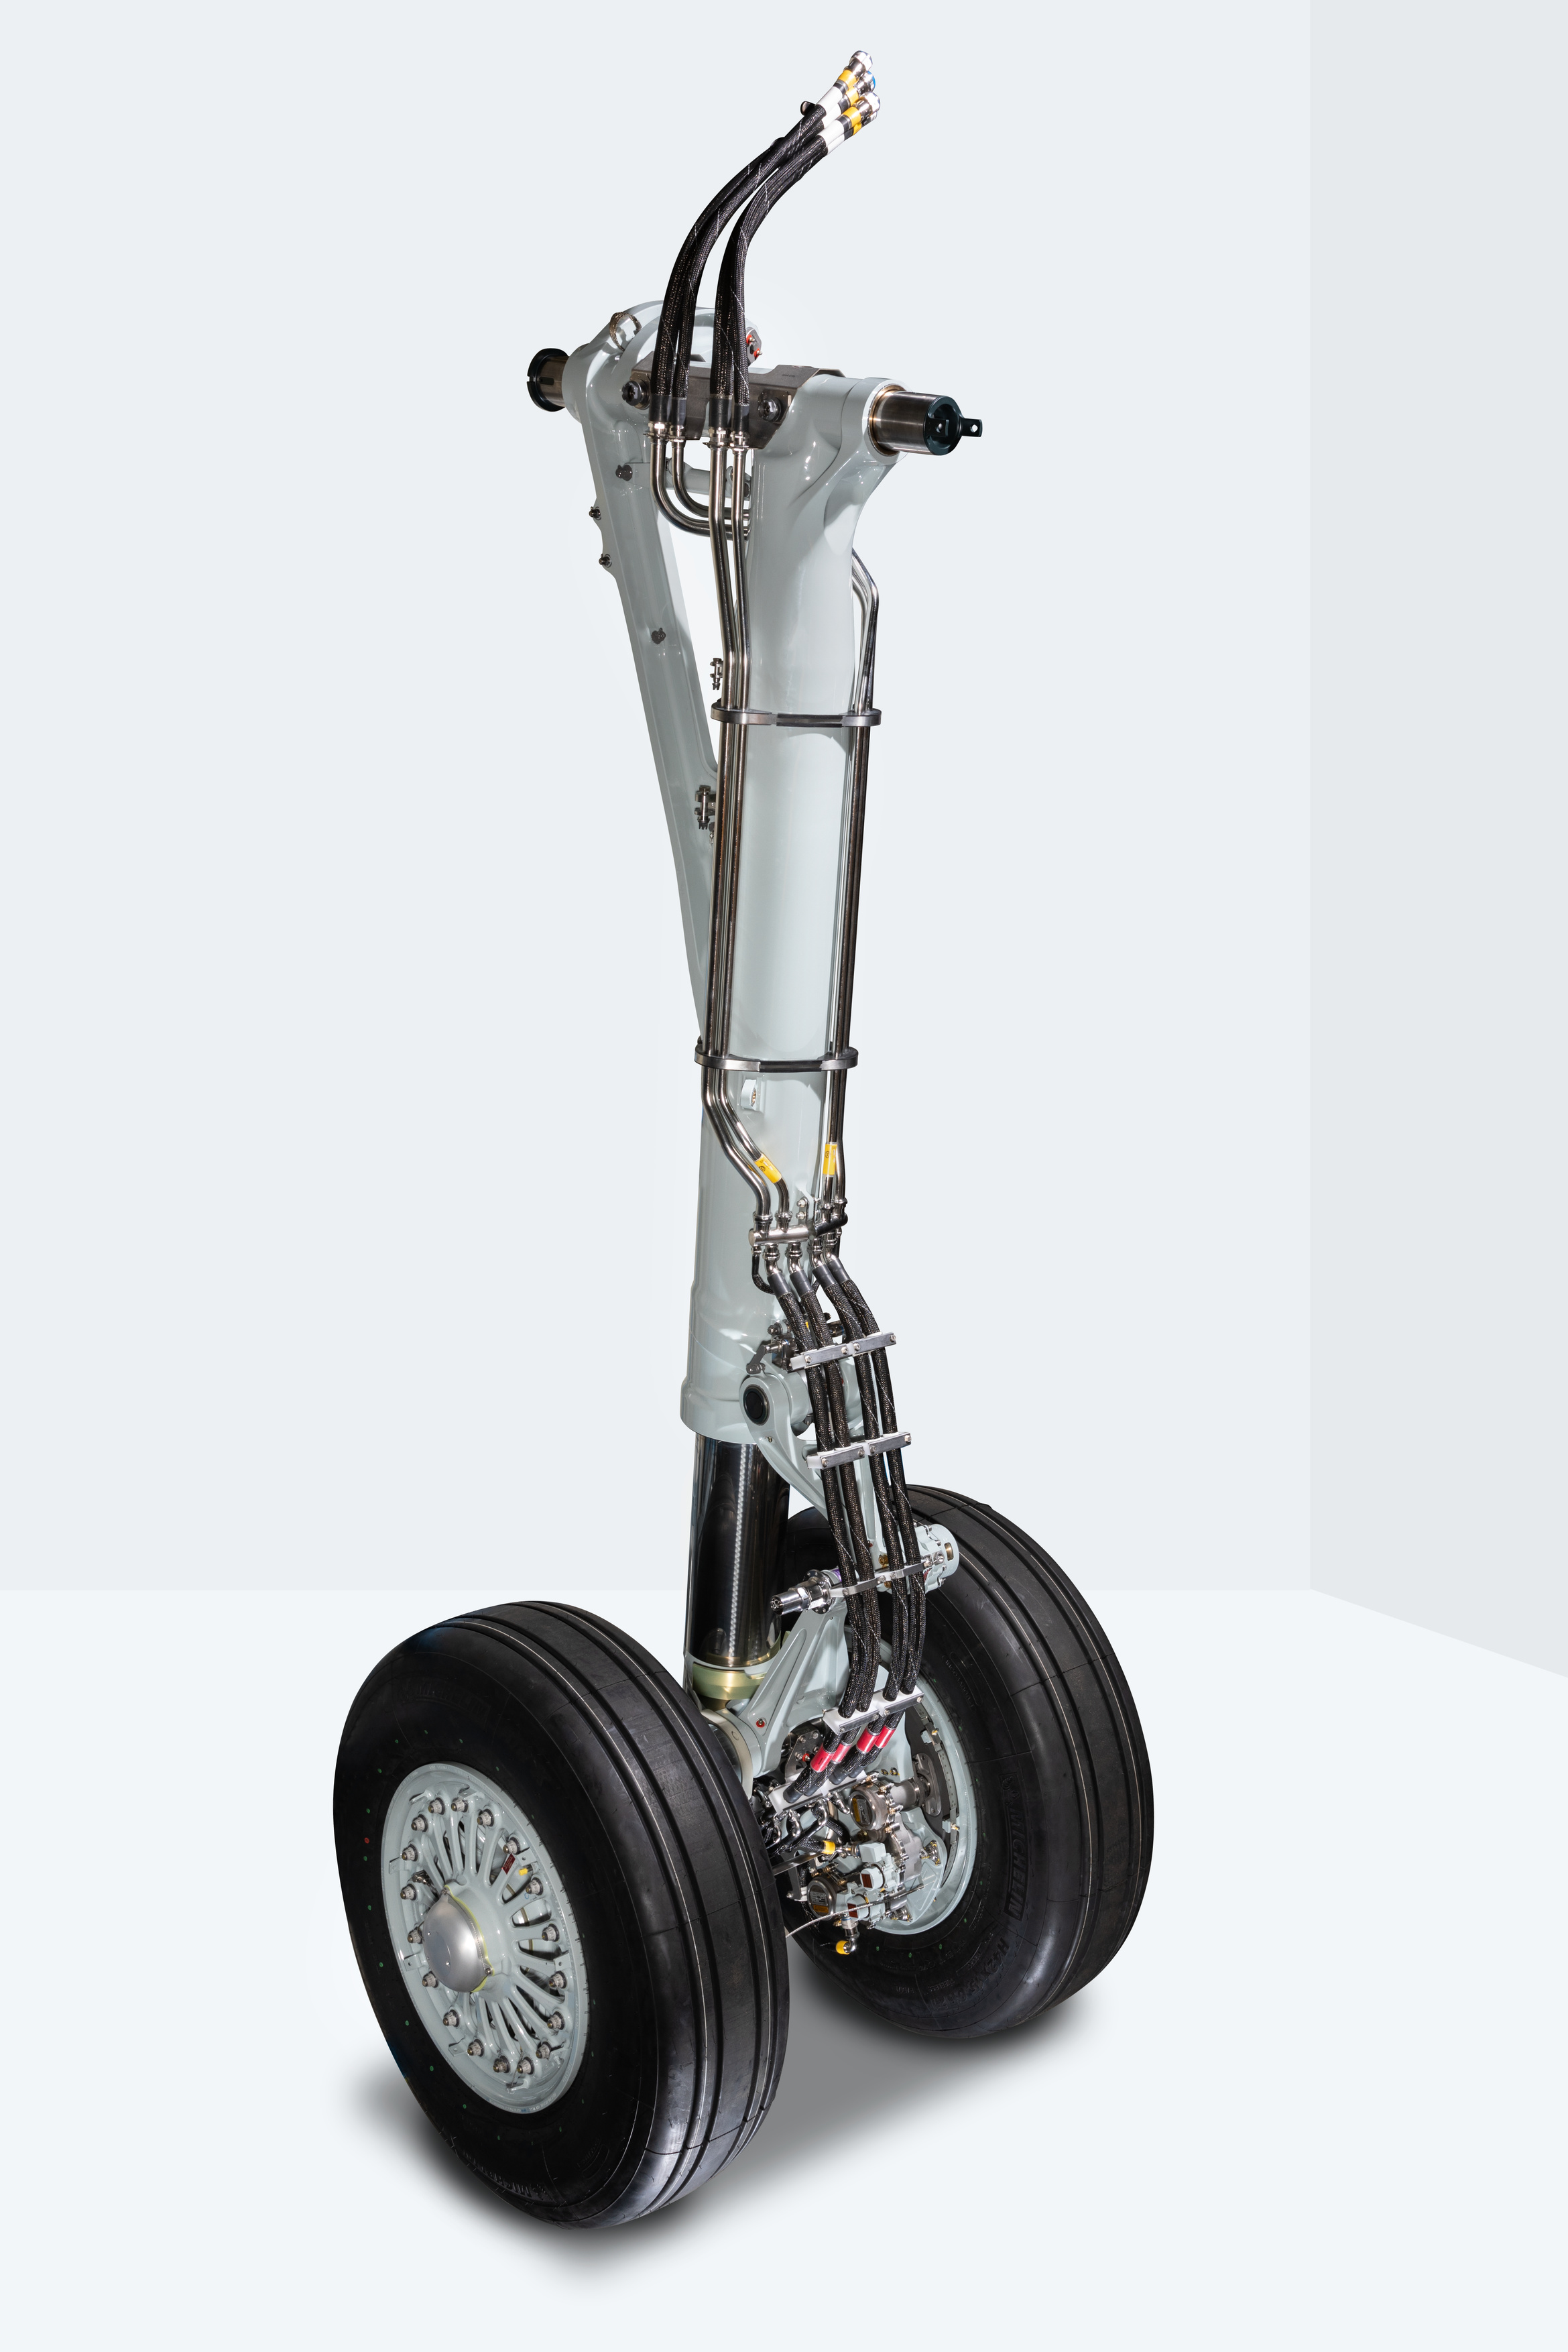 Liebherr and Airbus to collaborate on landing gear